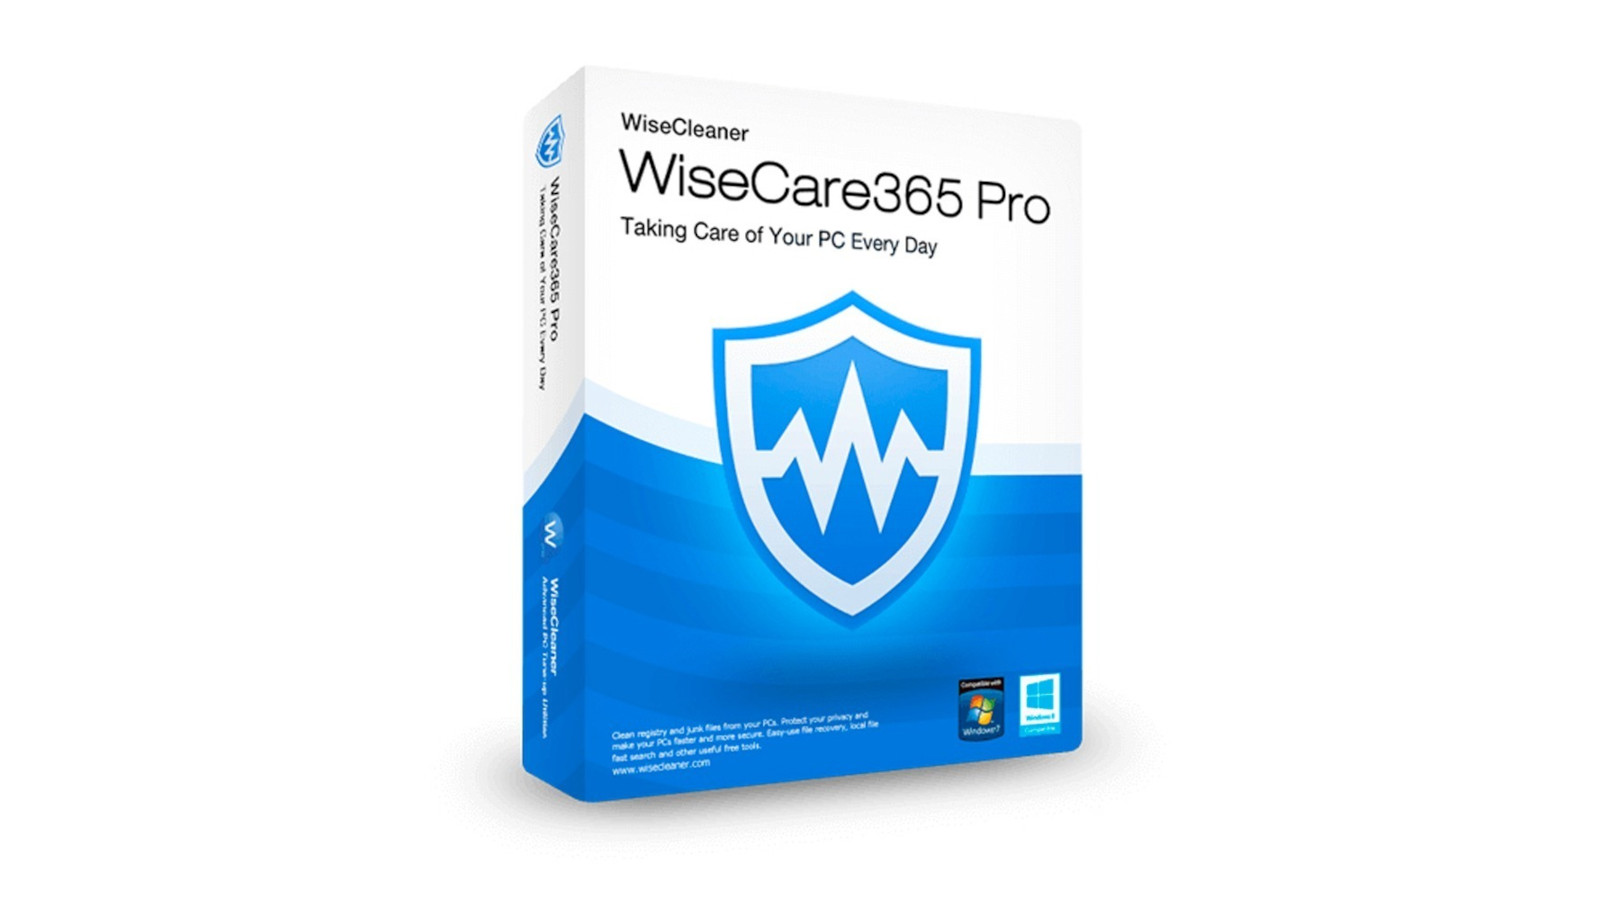 Wise Care 365 PRO CD Key (1 Year / 1 PC), $18.05